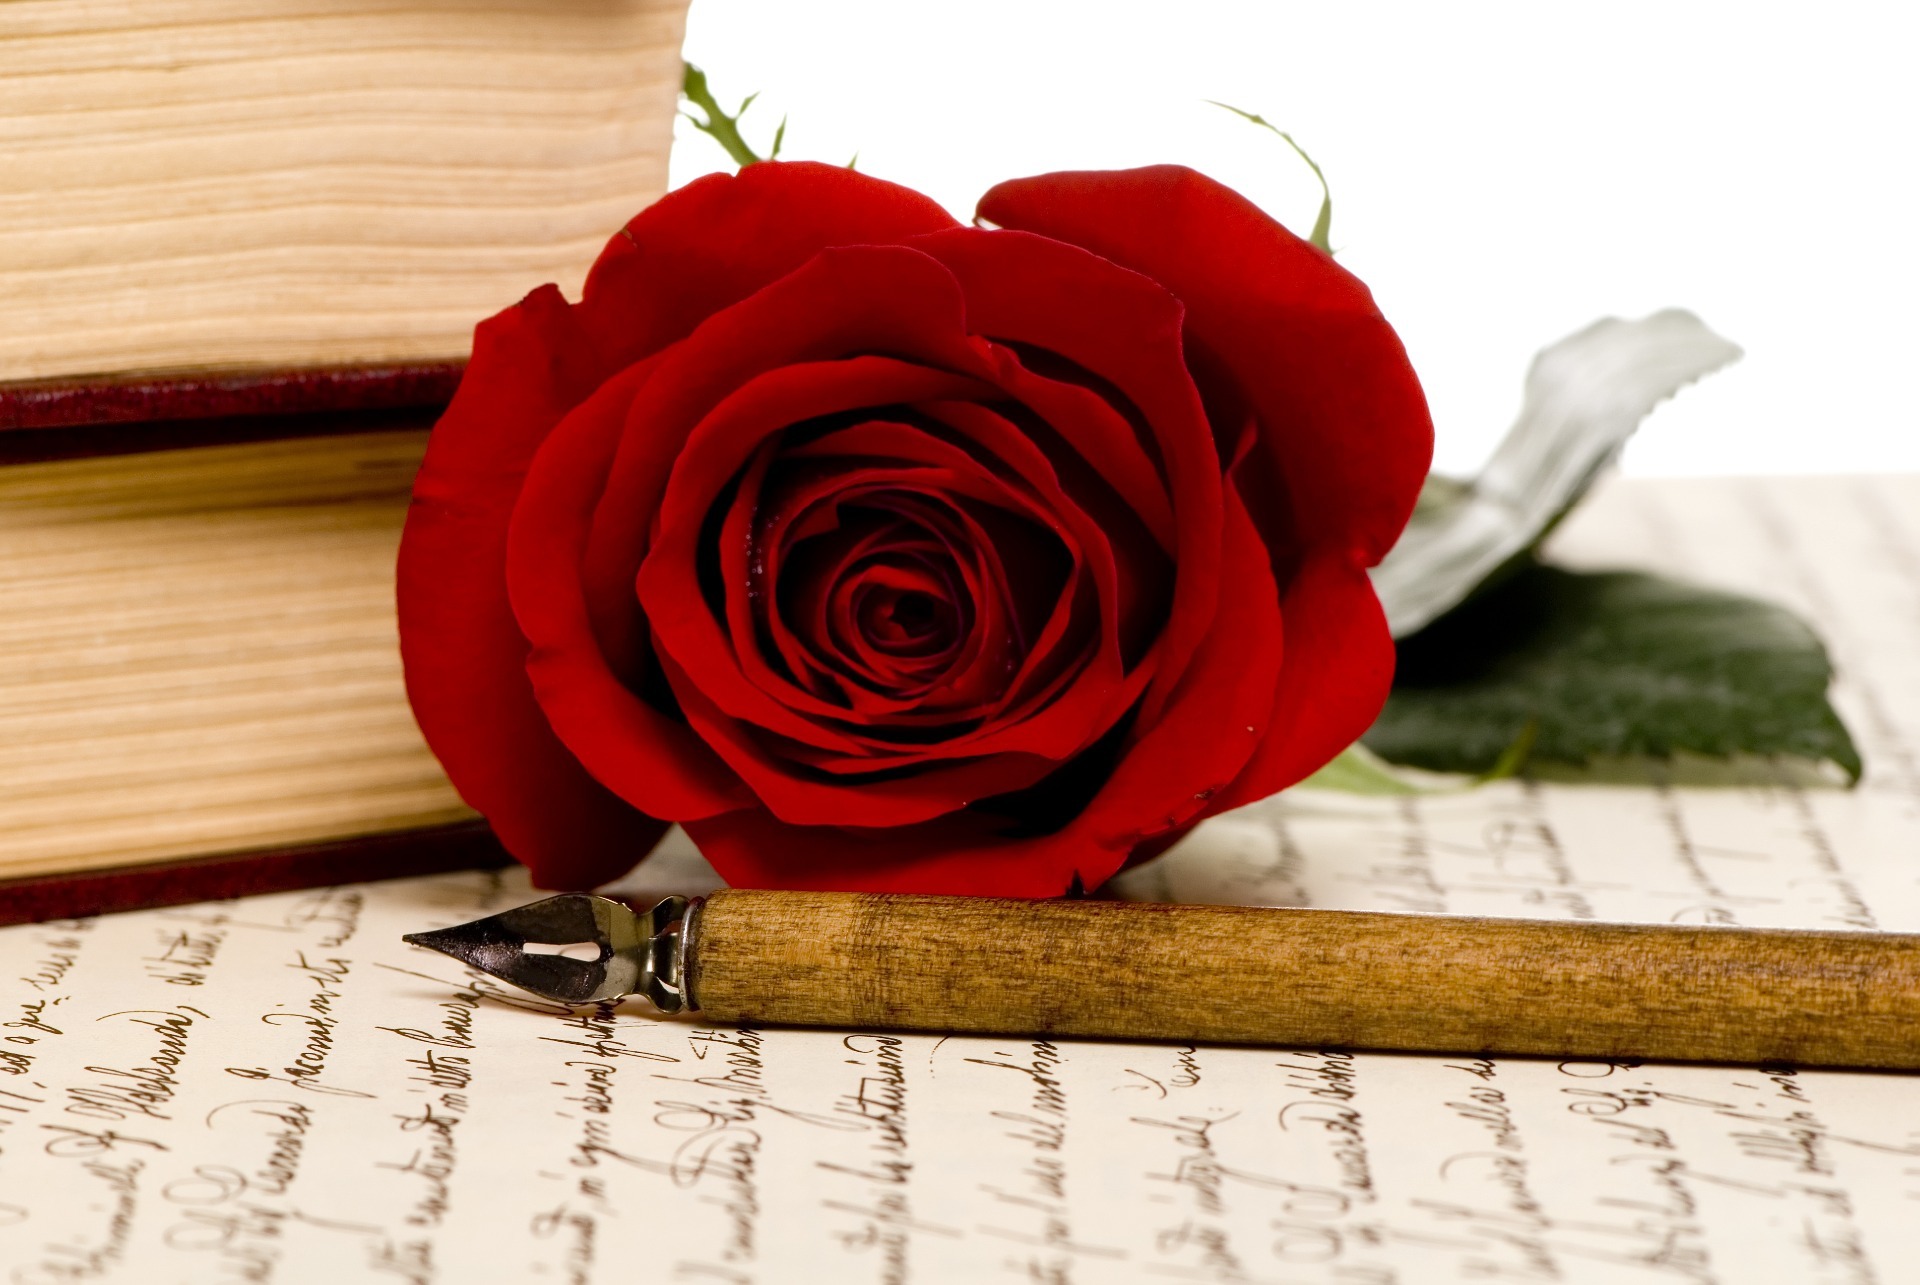 A red rose, lying on an old document,